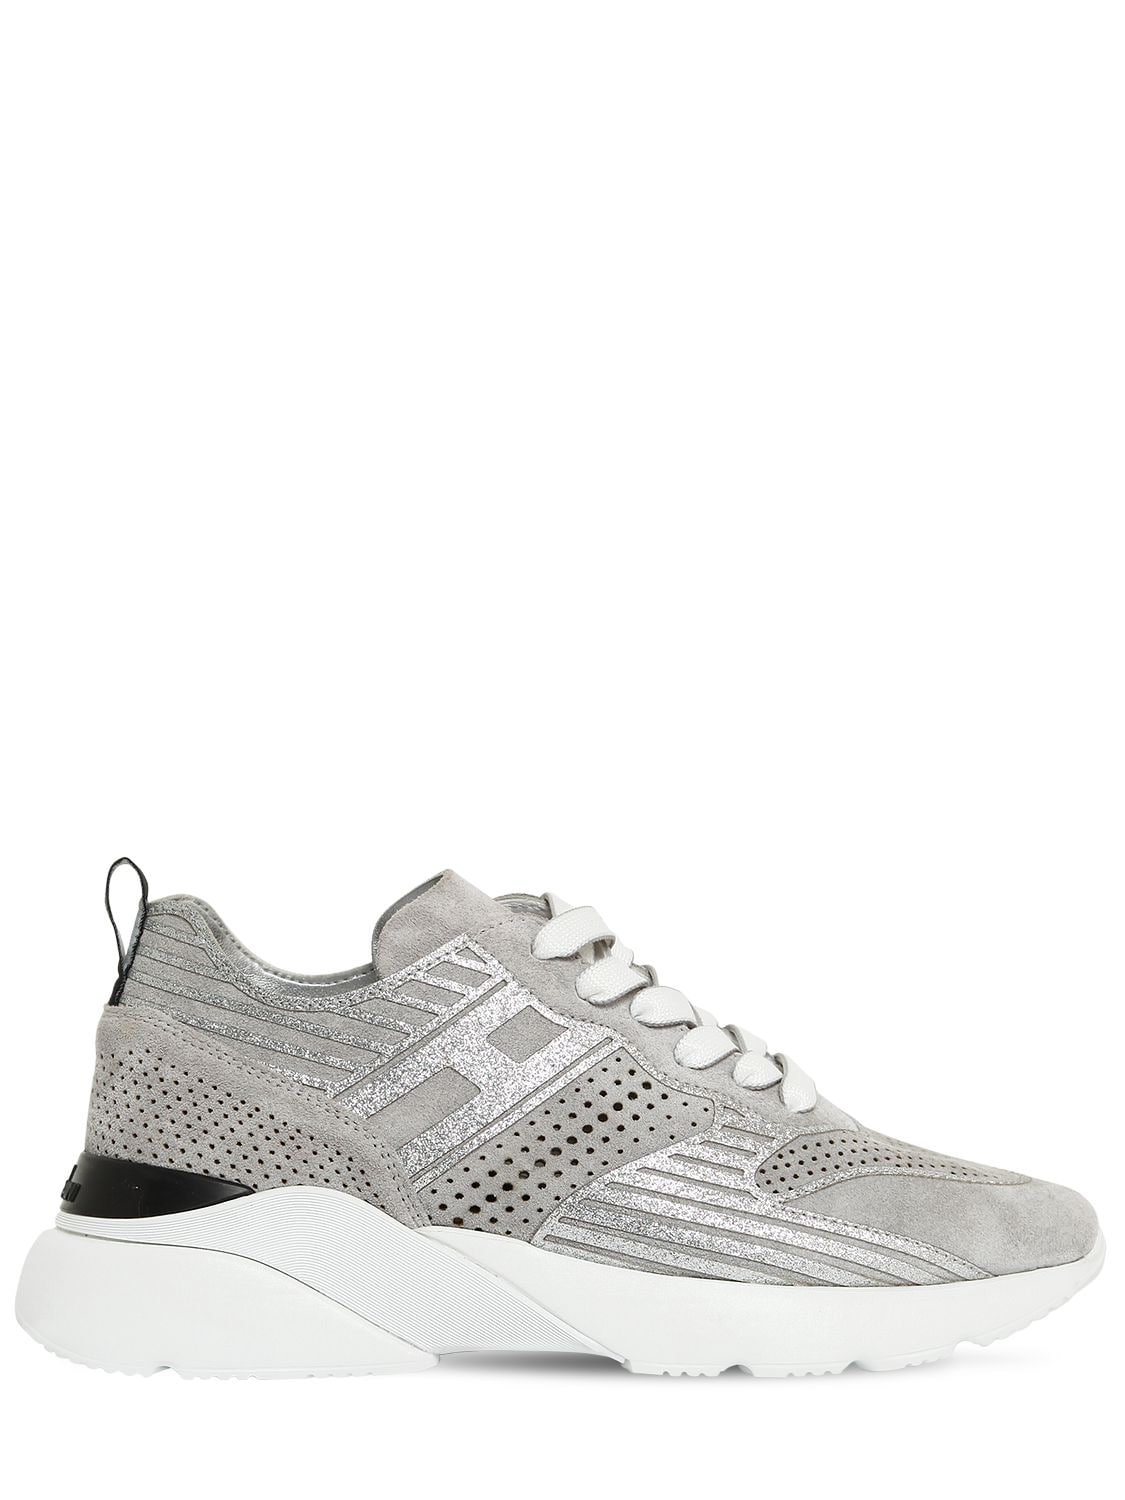 Hogan 40mm Active One Perforated Suede Sneaker In Silver